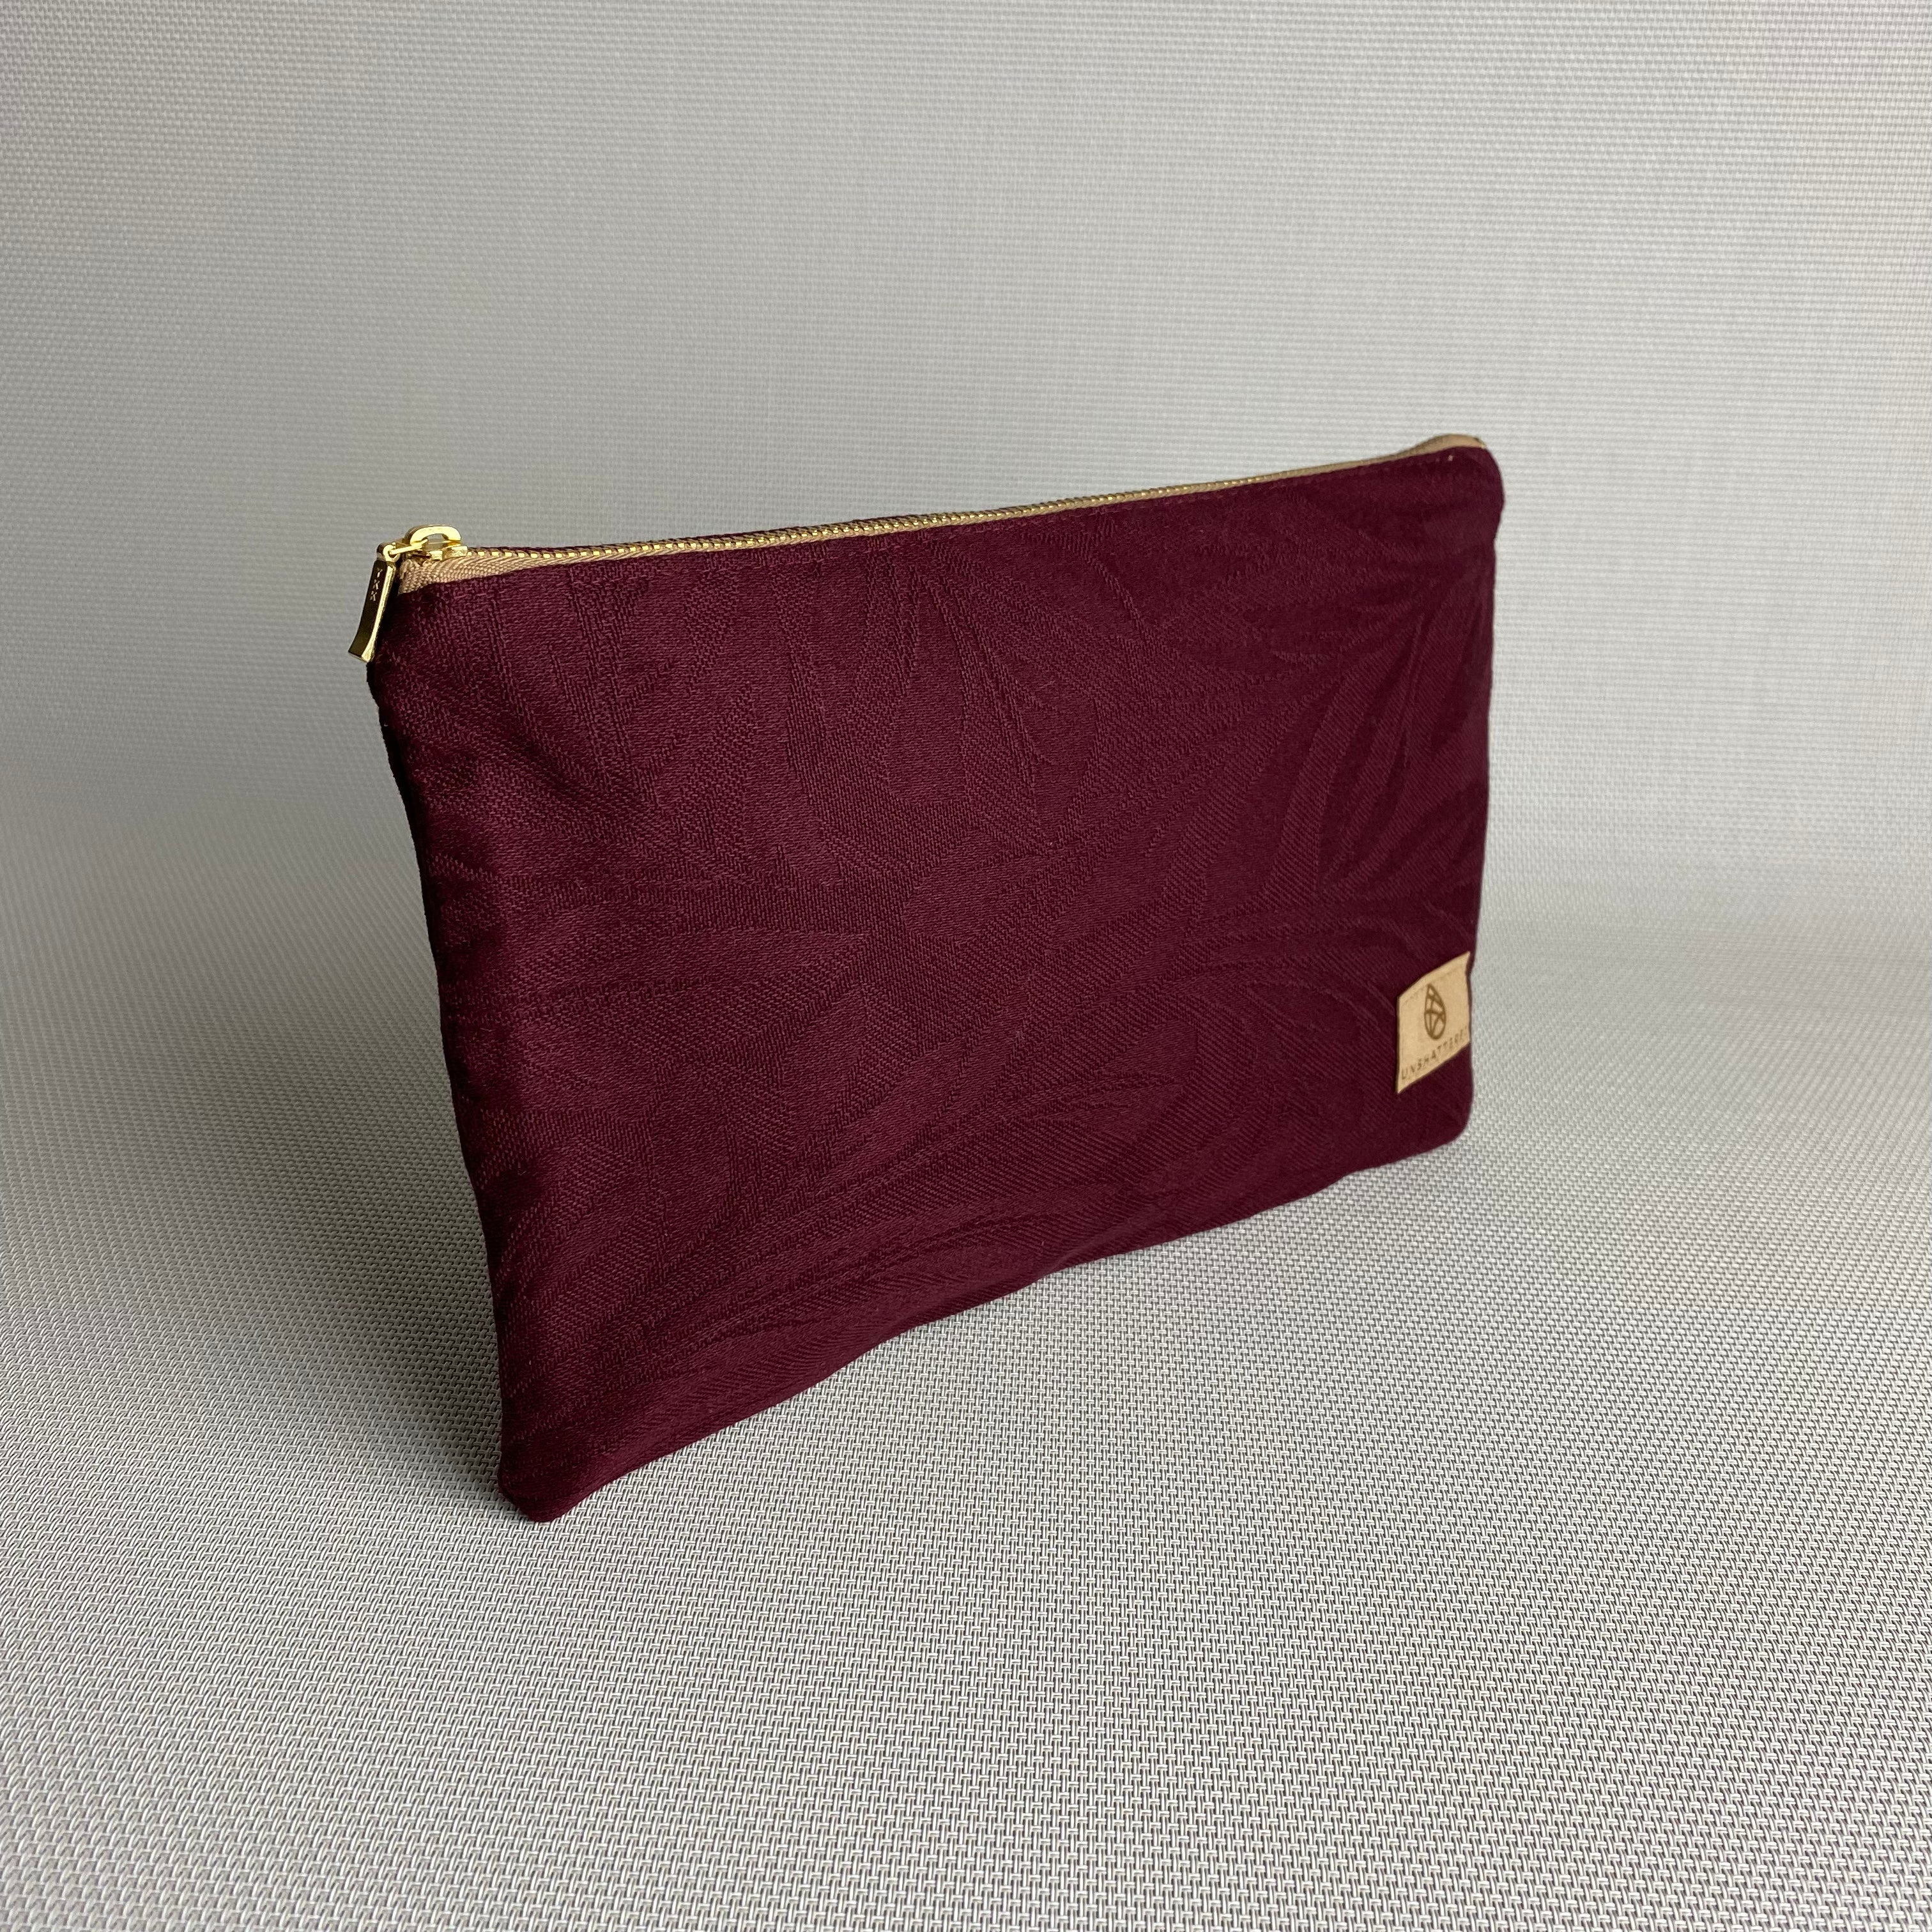 Image of Stephanie Large Zip Pouch